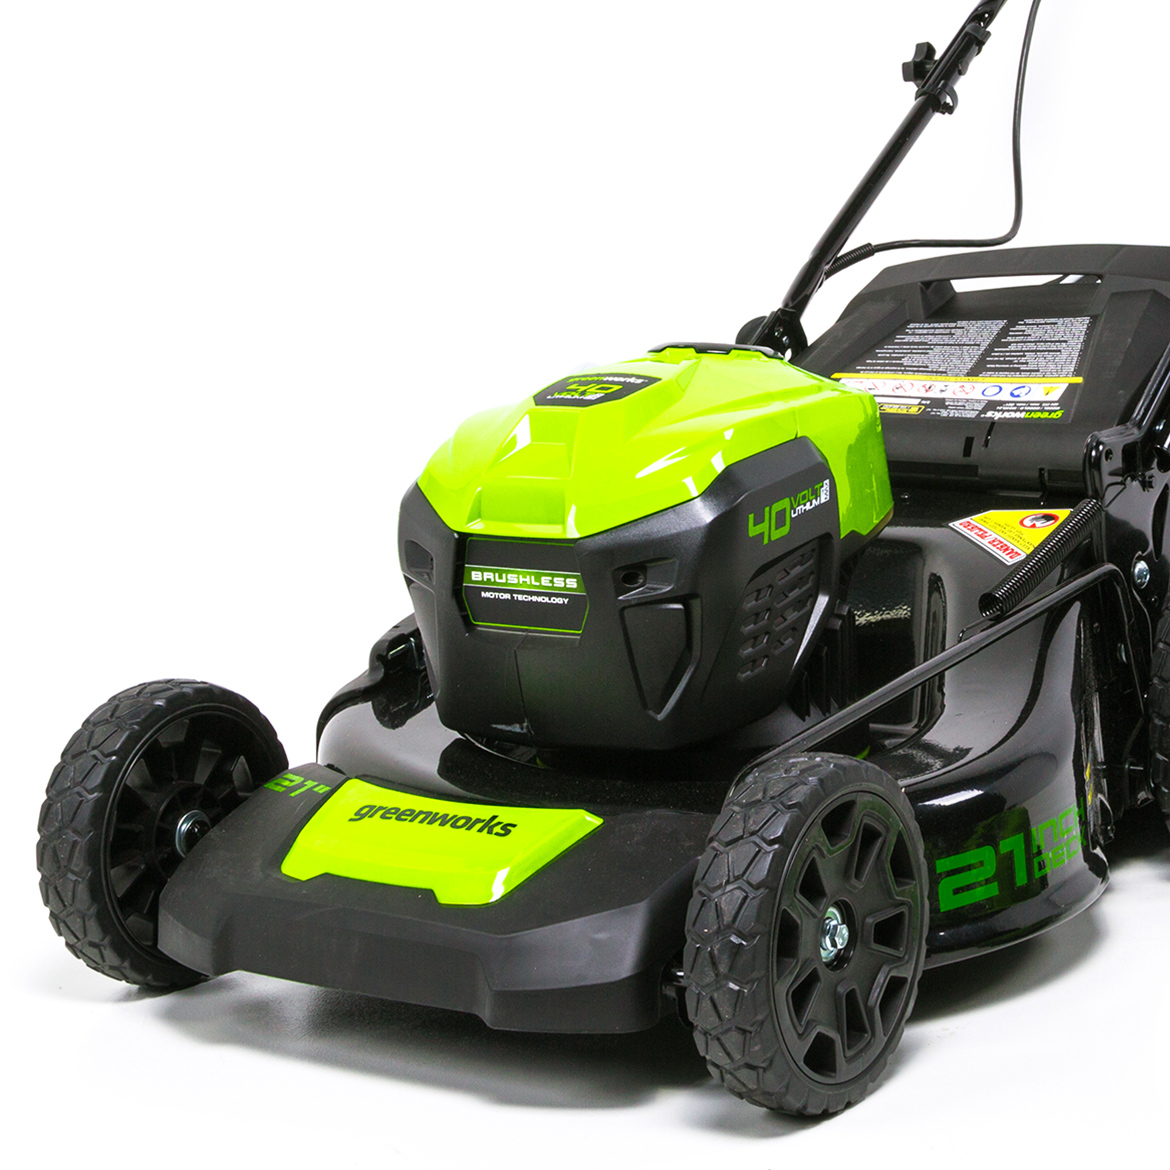 Greenworks G-MAX 40V 21 inch Brushless Dual Port Lawn Mower, Battery and Charger Not Included 2506502 - image 3 of 3